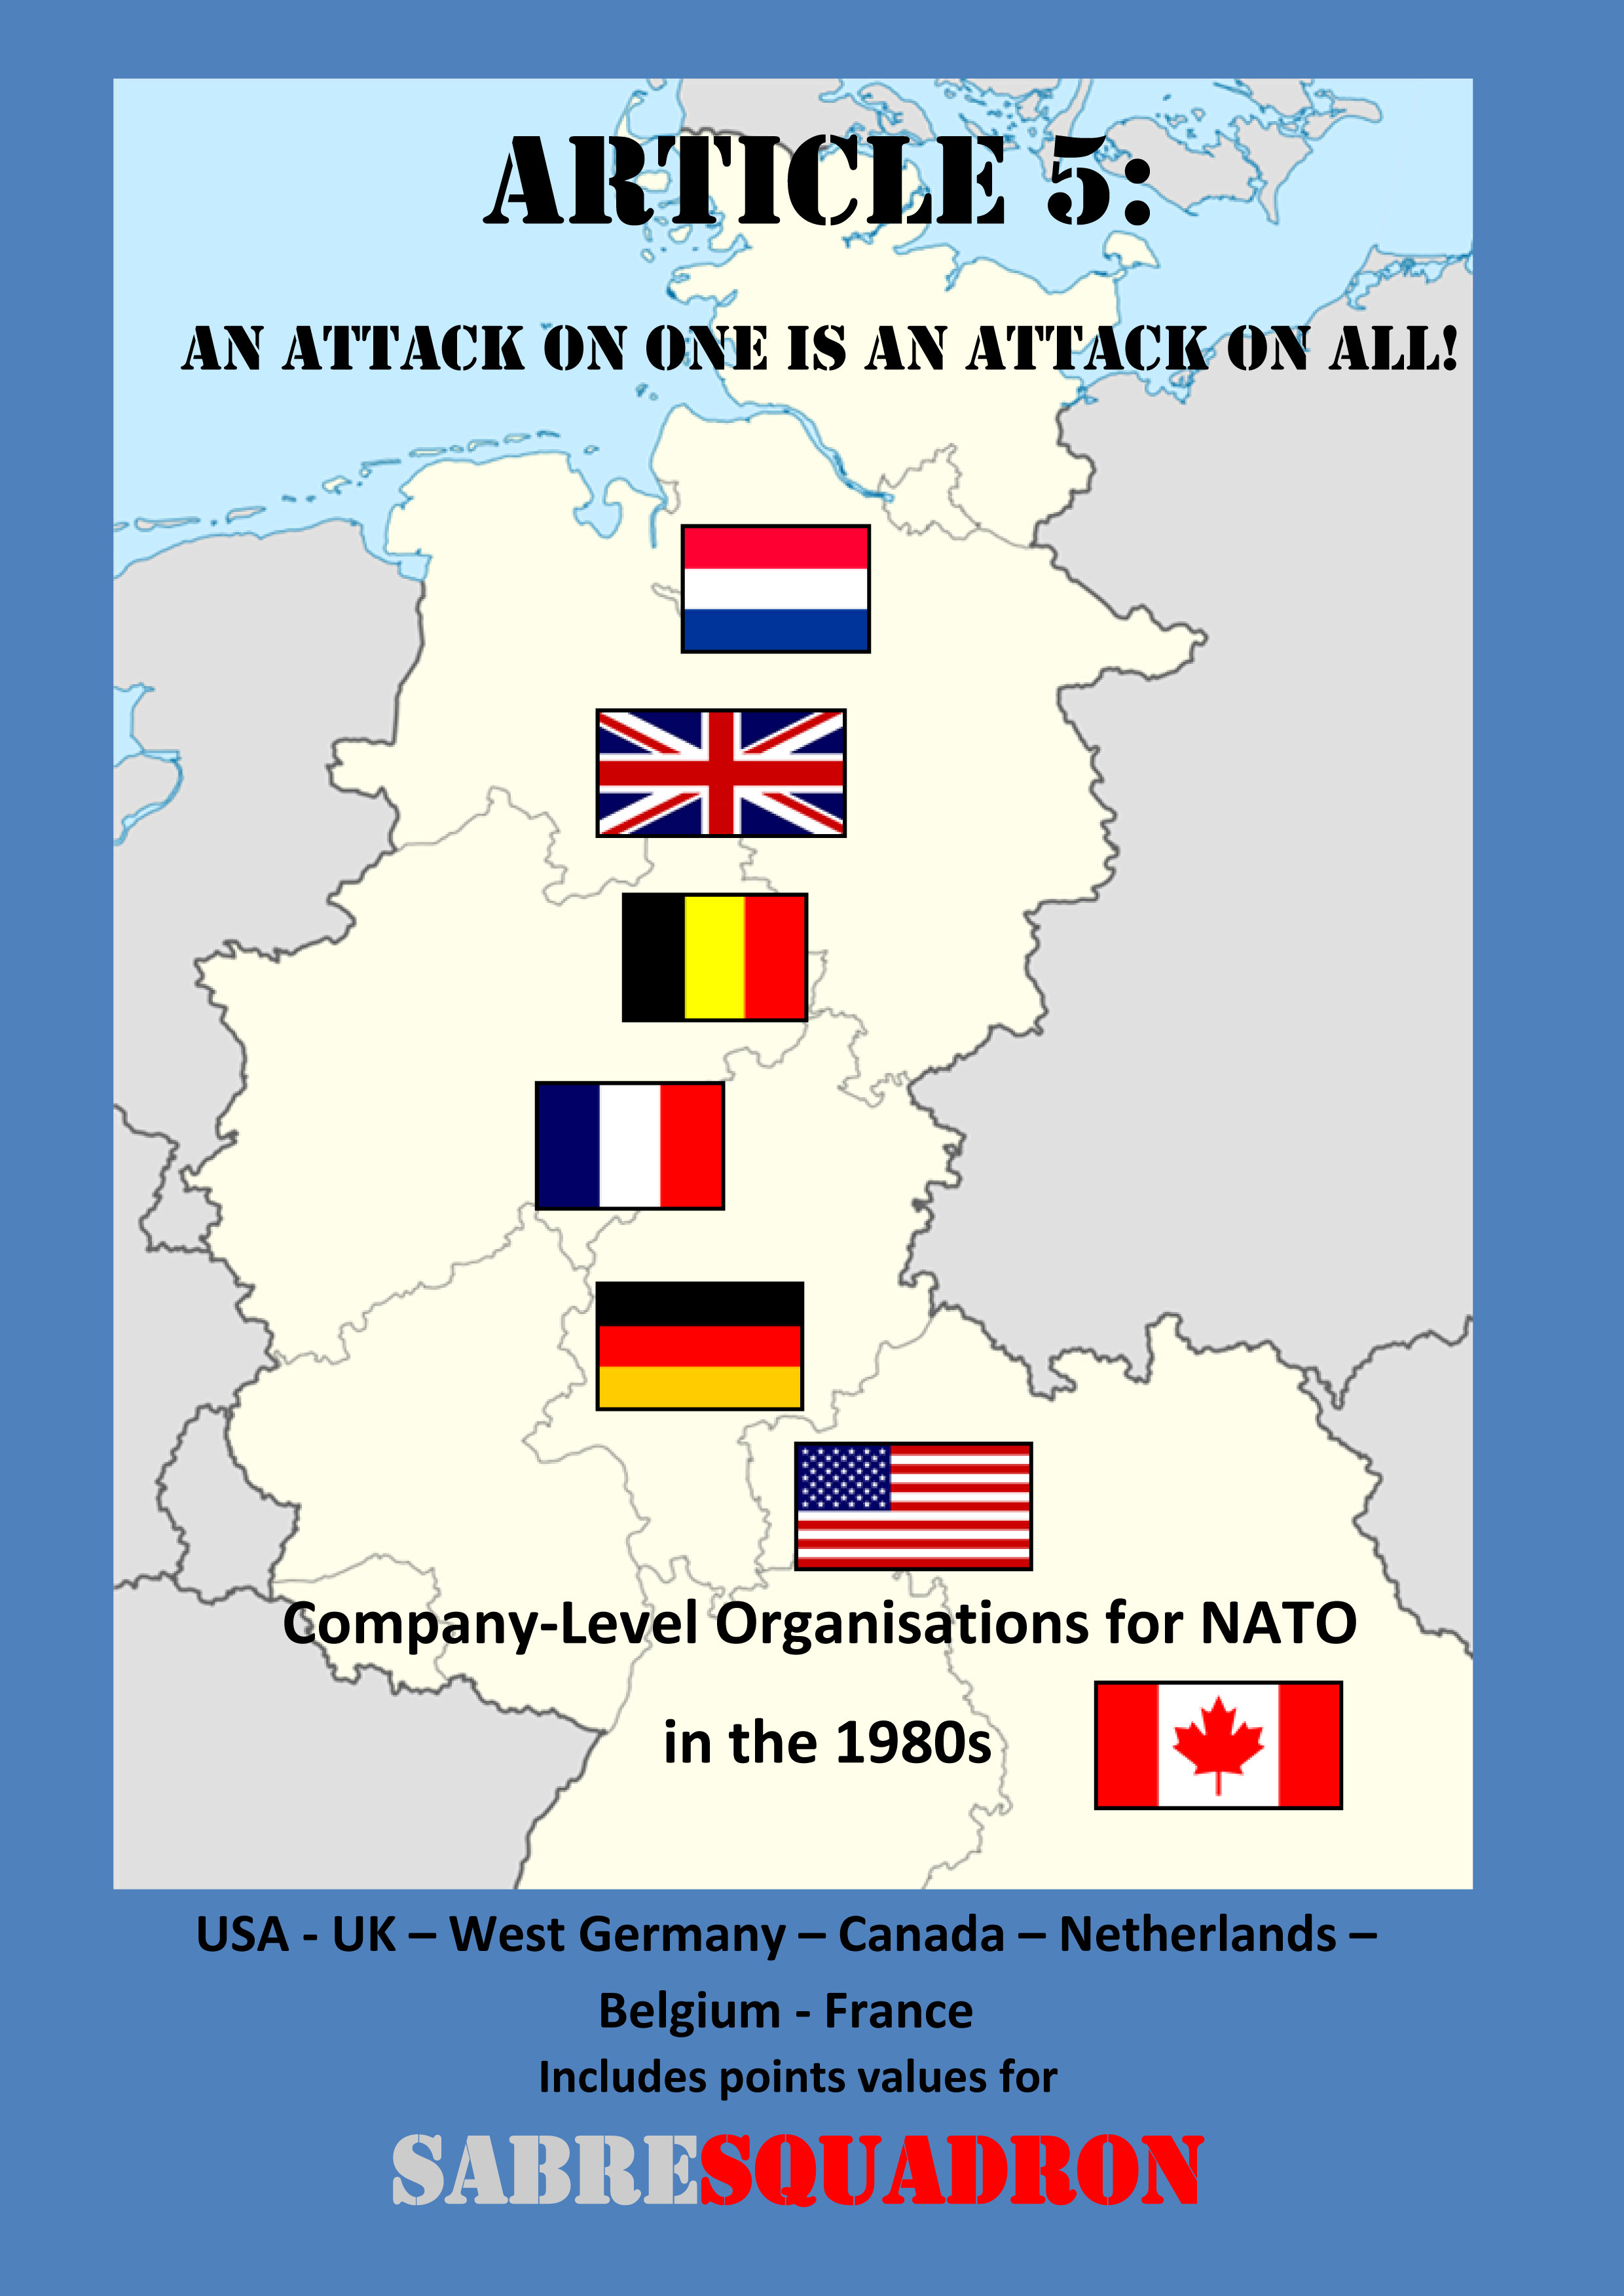 The cover sheet of Article 5, the Sabresquadron NATO supplement